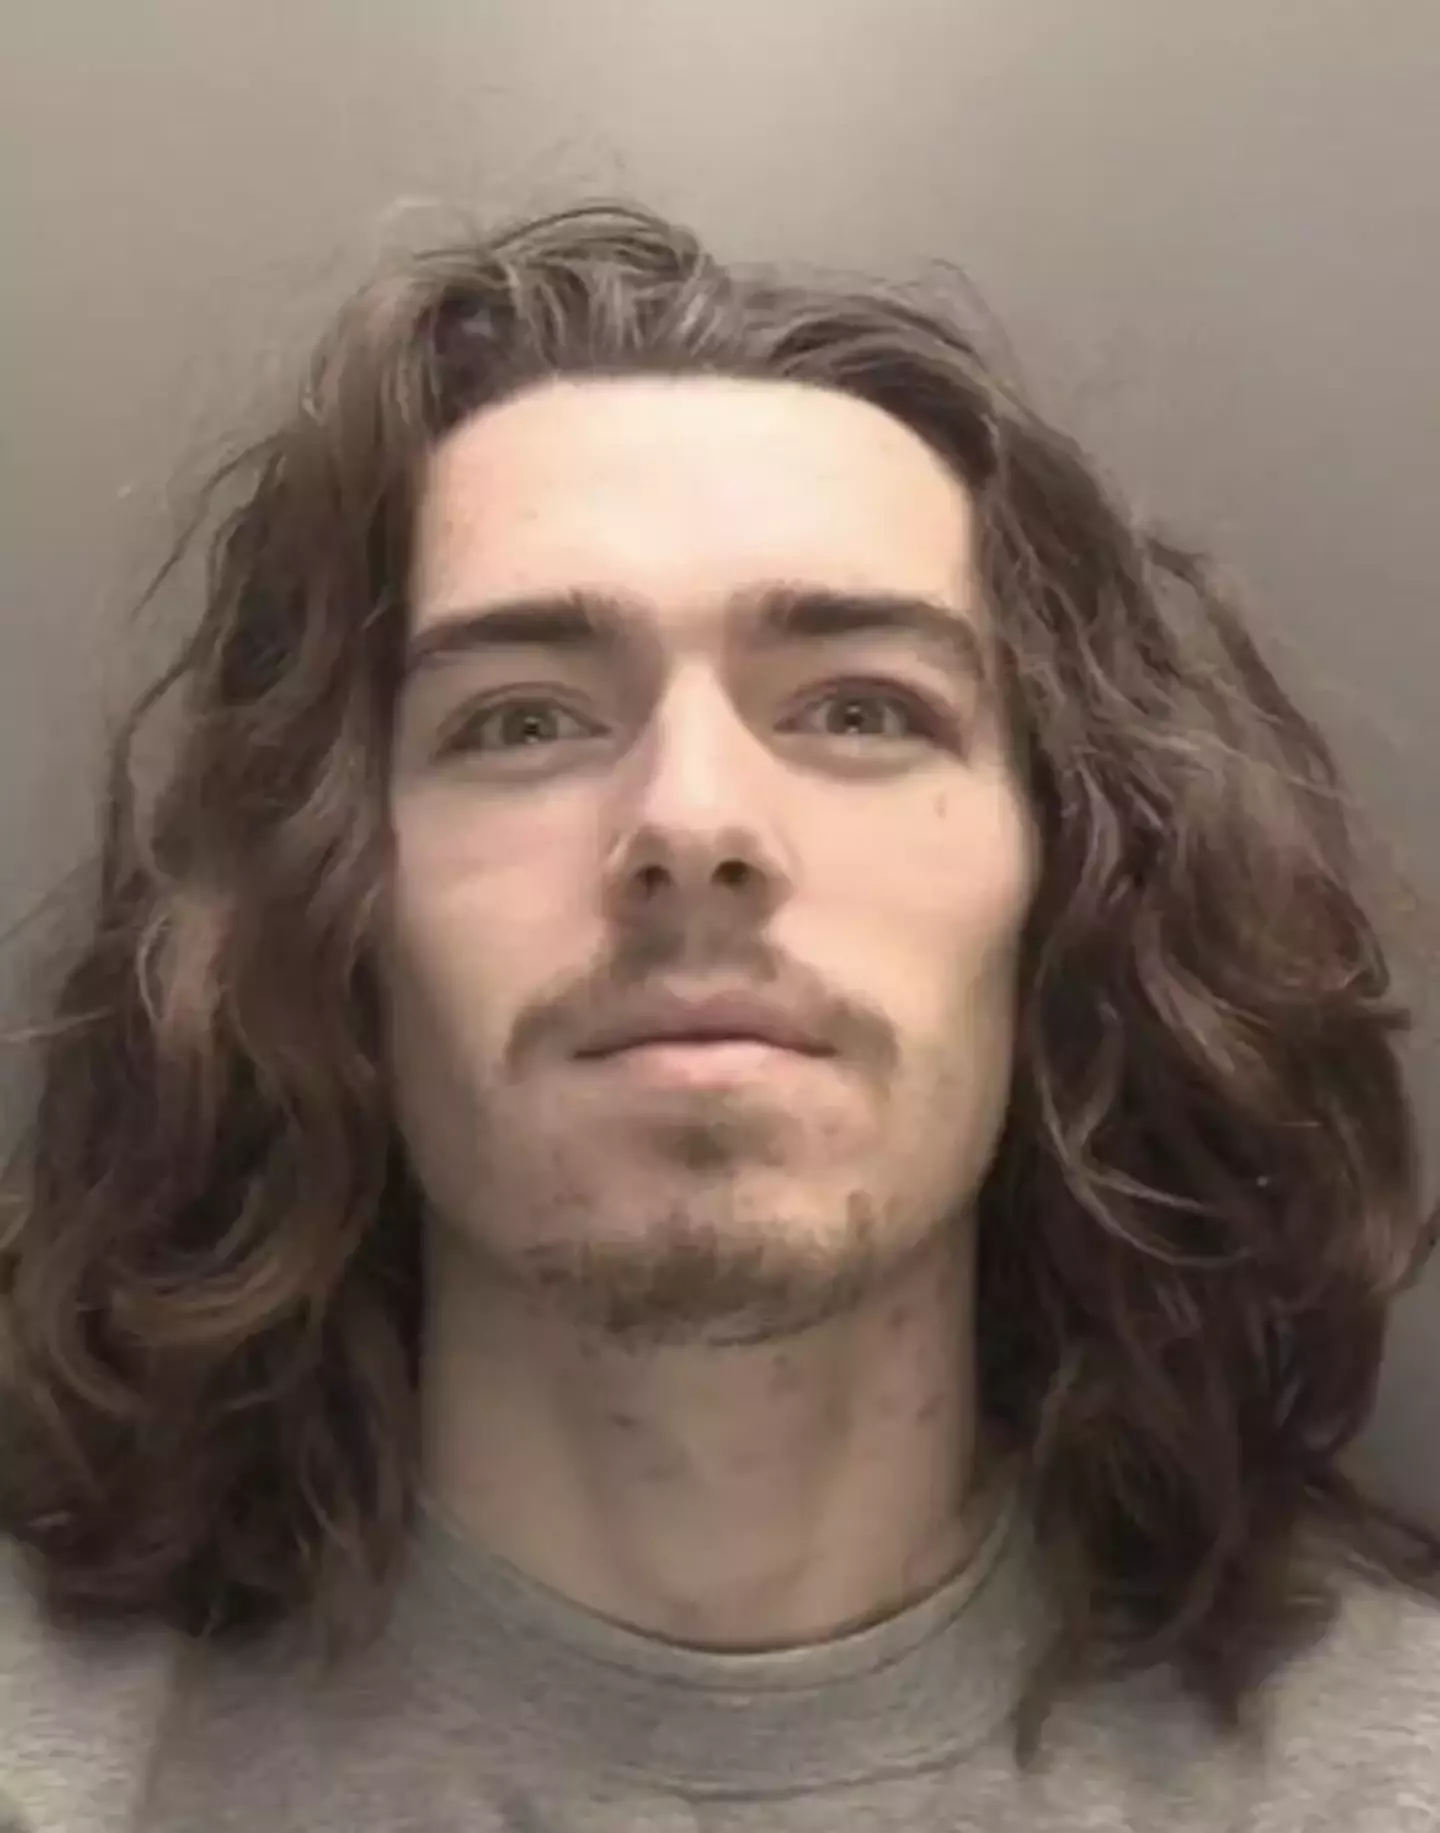 Connor Chapman was sentenced to life with a minimum term of 48 years.